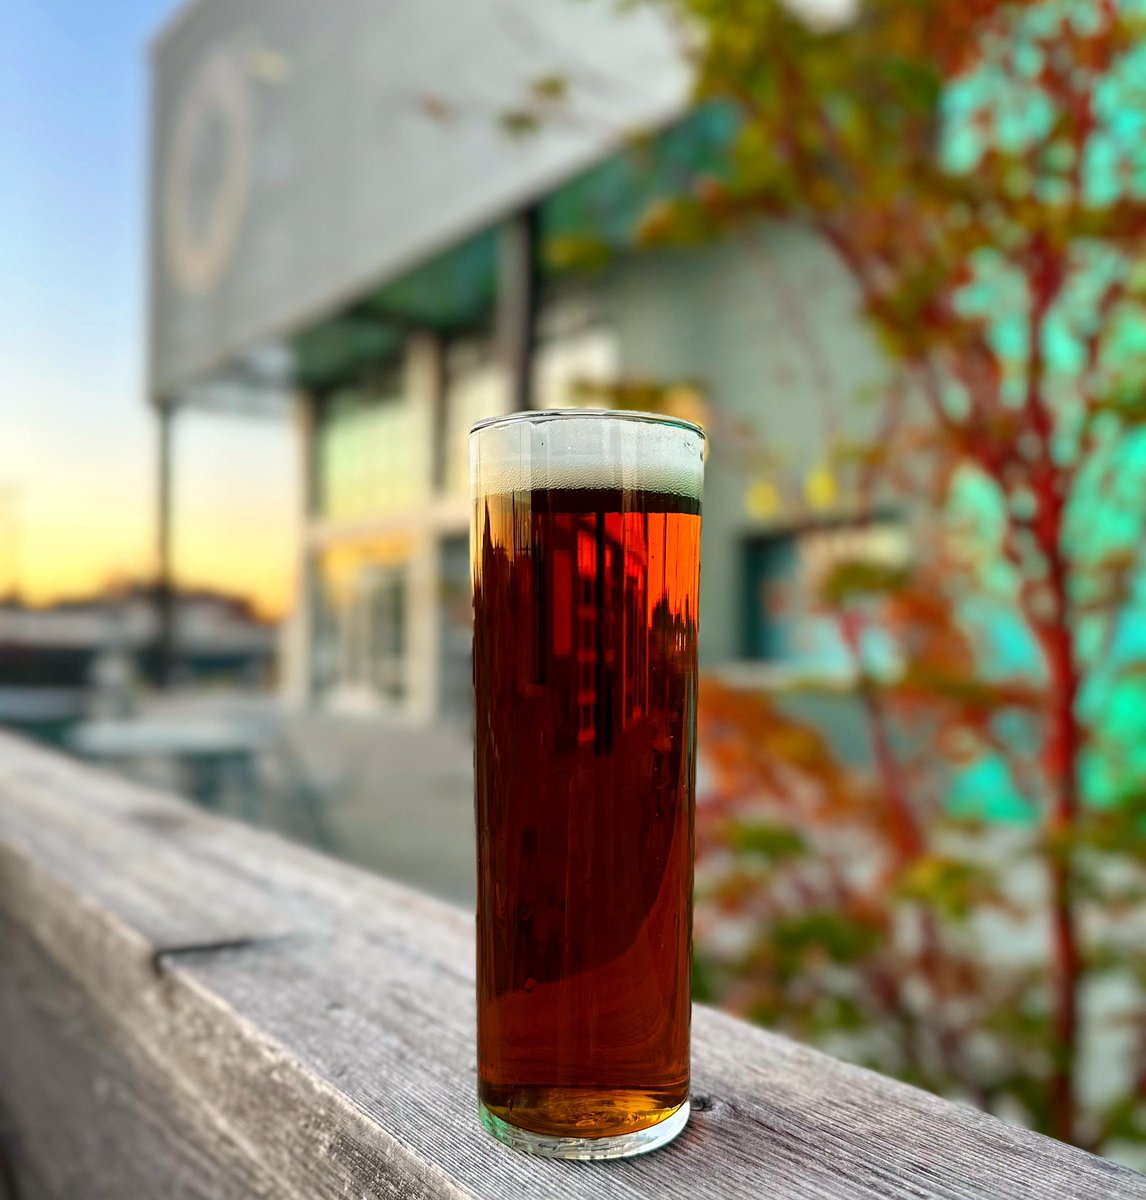 Familie Freunde Düsseldorf Altbier is back! (DRAFT ONLY) 4.5% ABV This is a German copper colored ale with rich toasty malt balanced with a firm, bitter backbone.